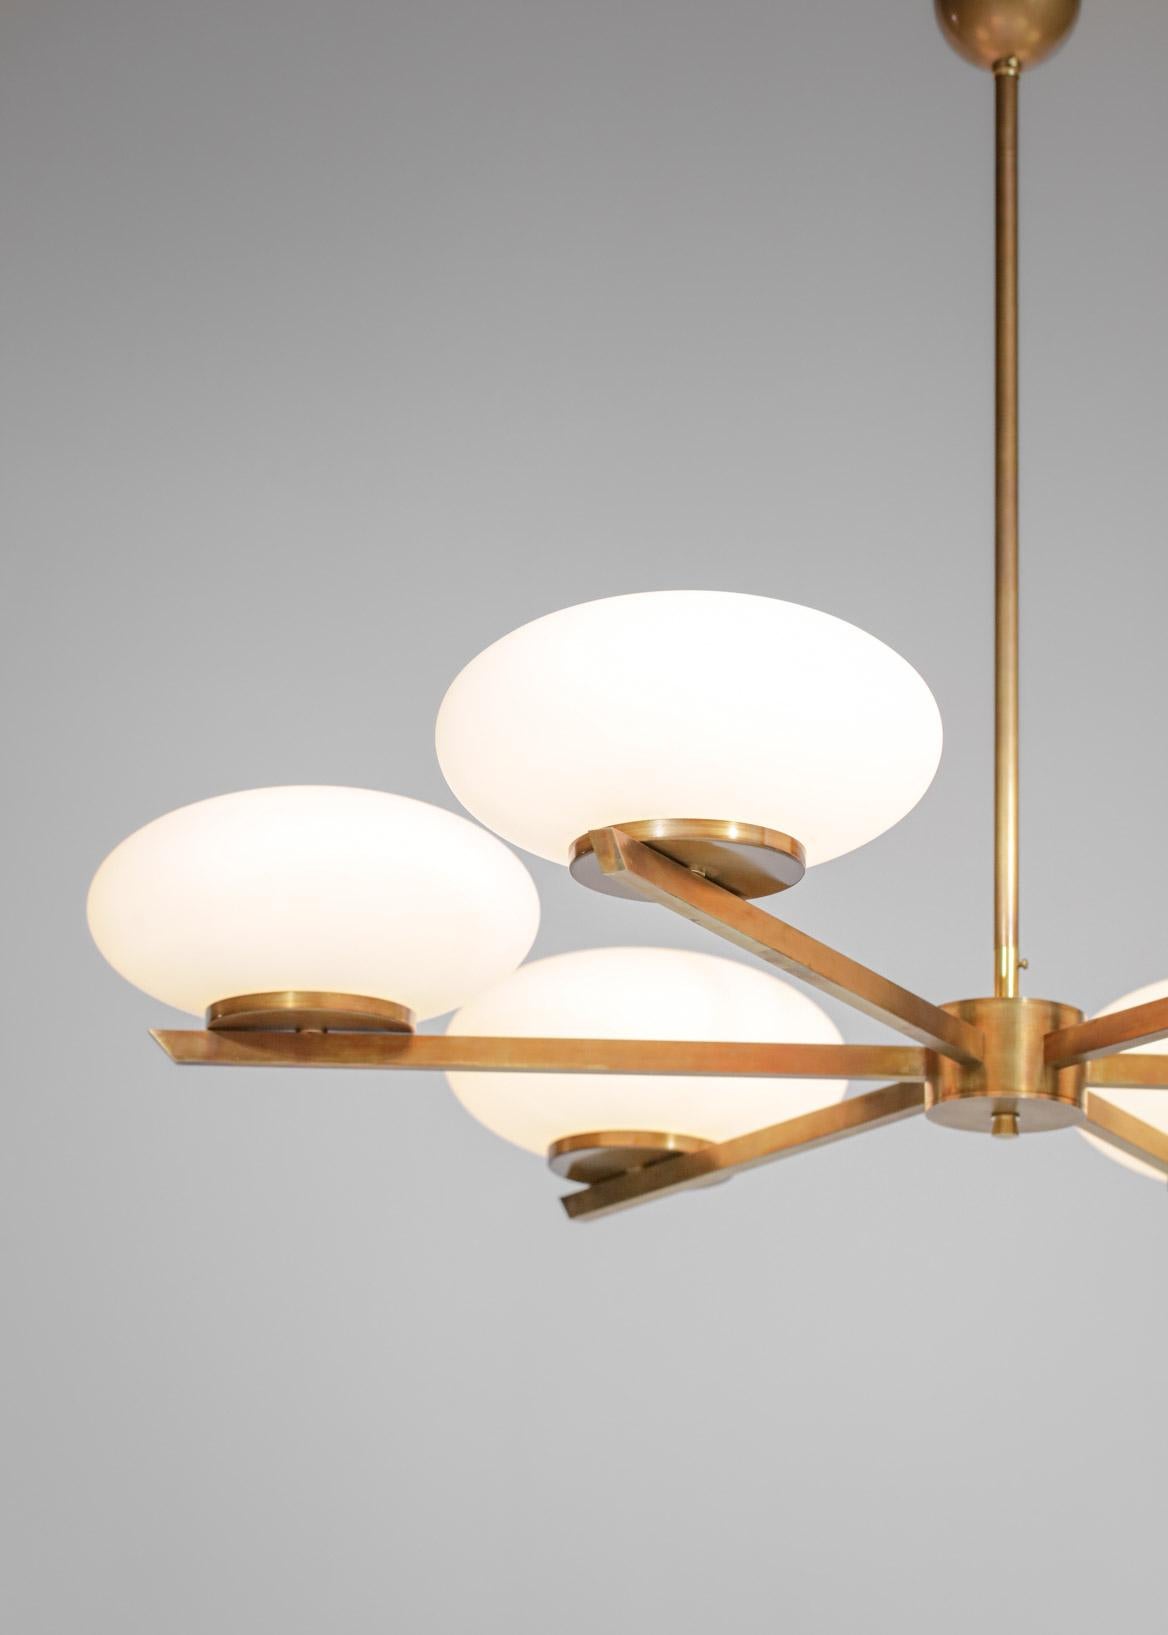 Contemporary Italian chandelier in brass and white opaline, composed of a solid brass structure and a row of six large ovoid glass opalines. Modern creation, brass finish on request.
Manufacturer : Handcrafted in Italy.